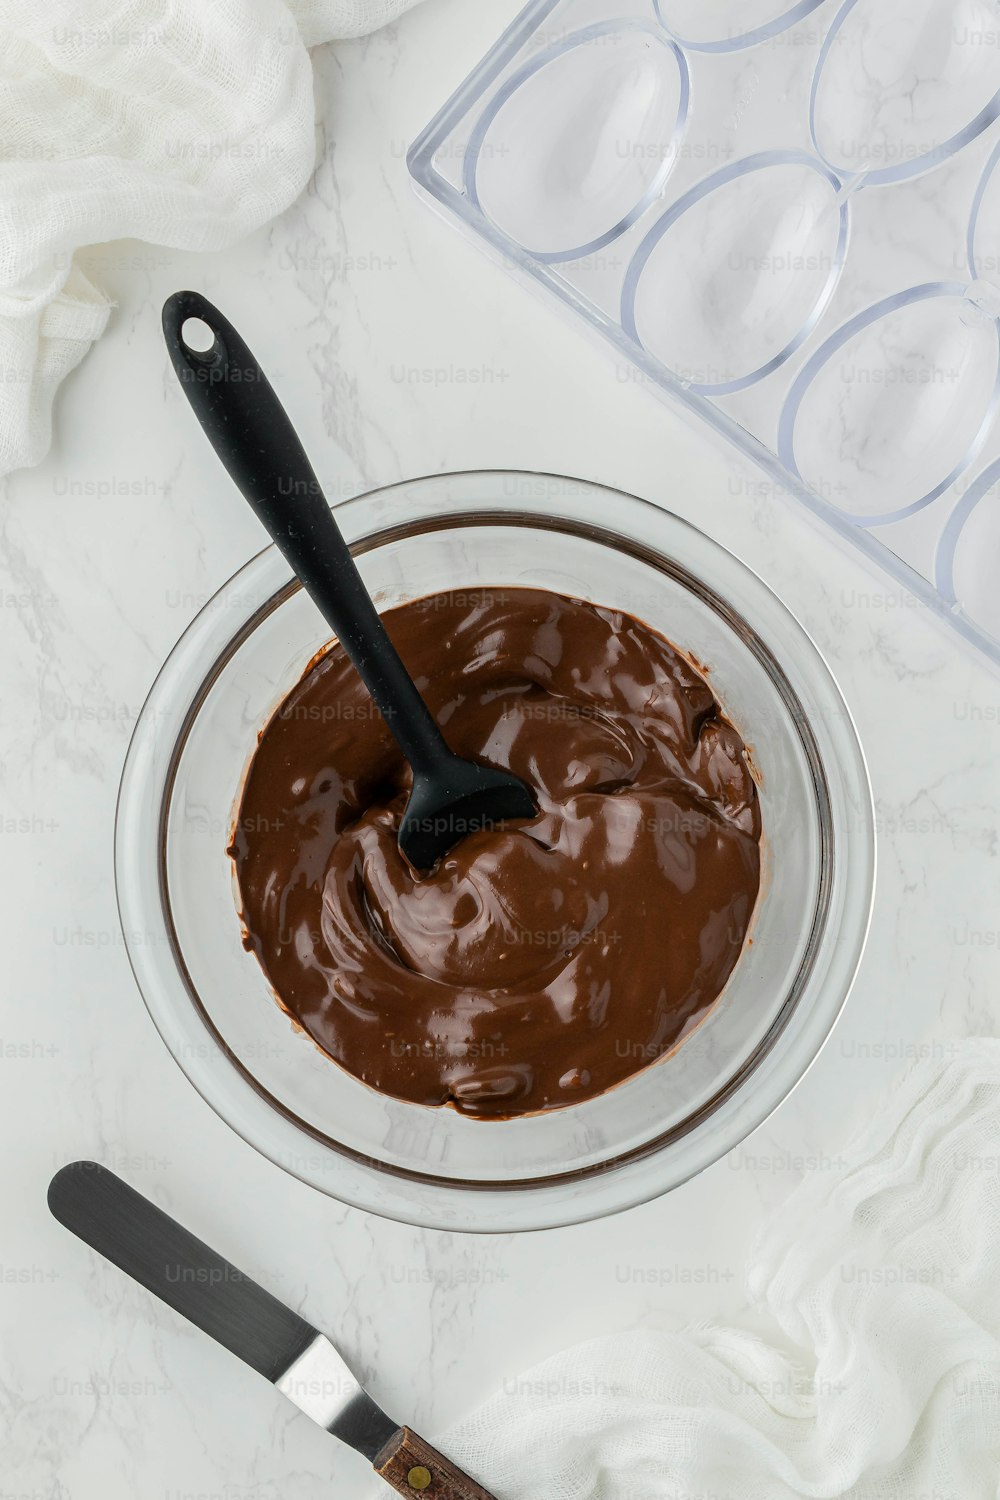 a bowl of chocolate with a spoon in it